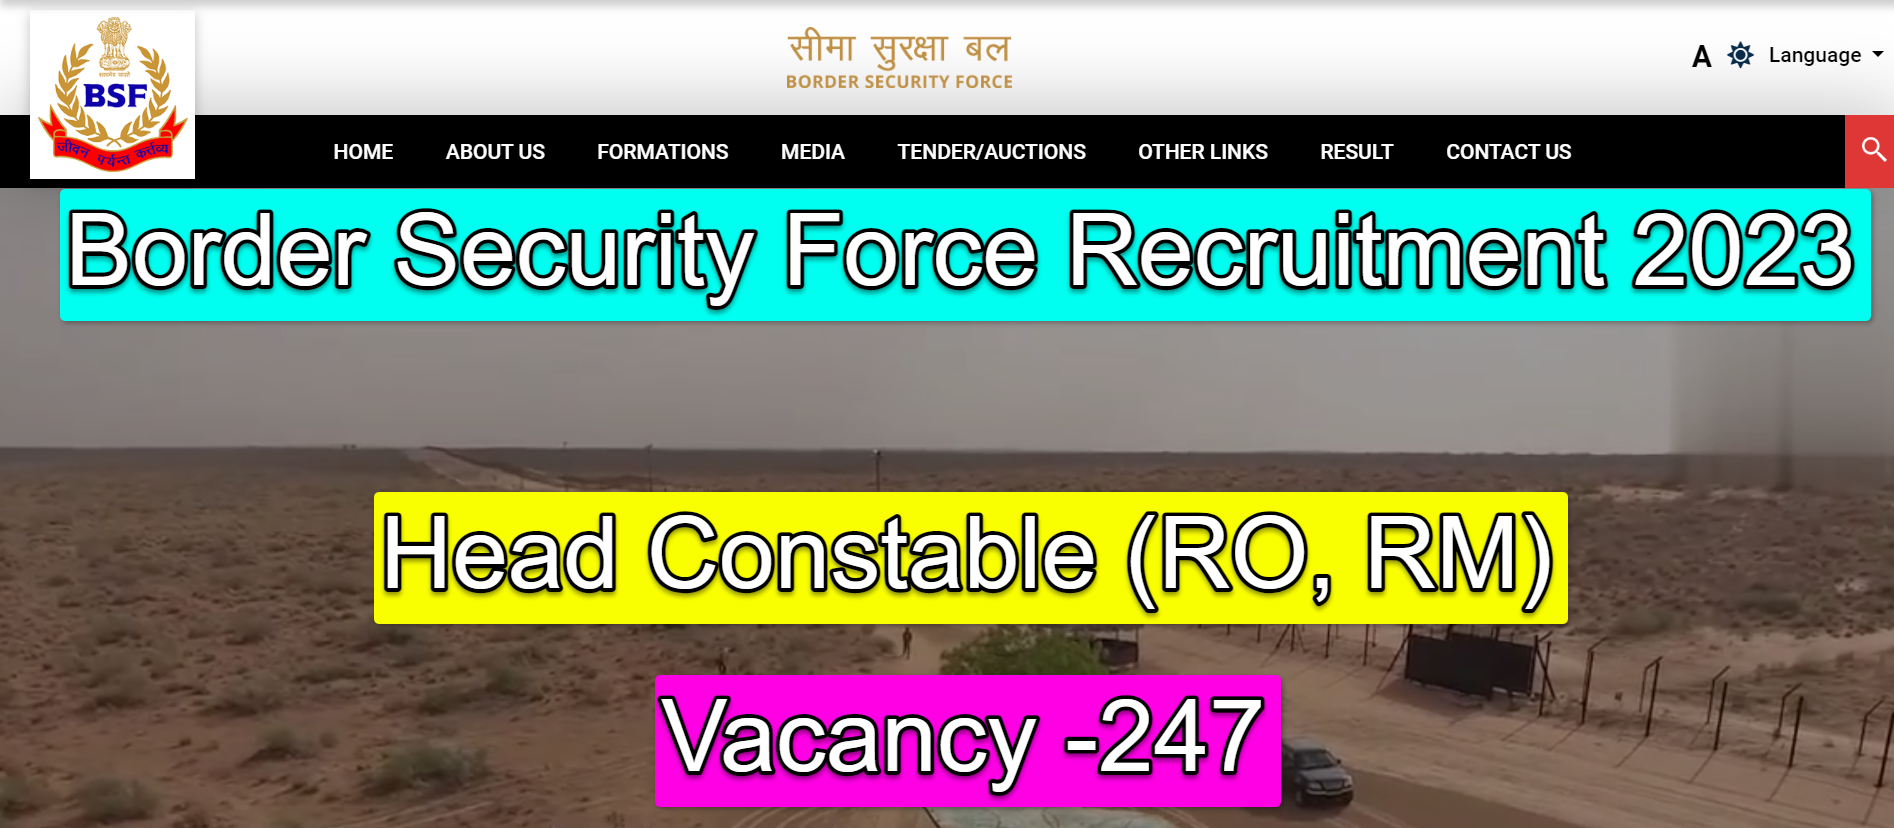 BSF Recruitment 2023 - Head Constable (RO and RM) Posts